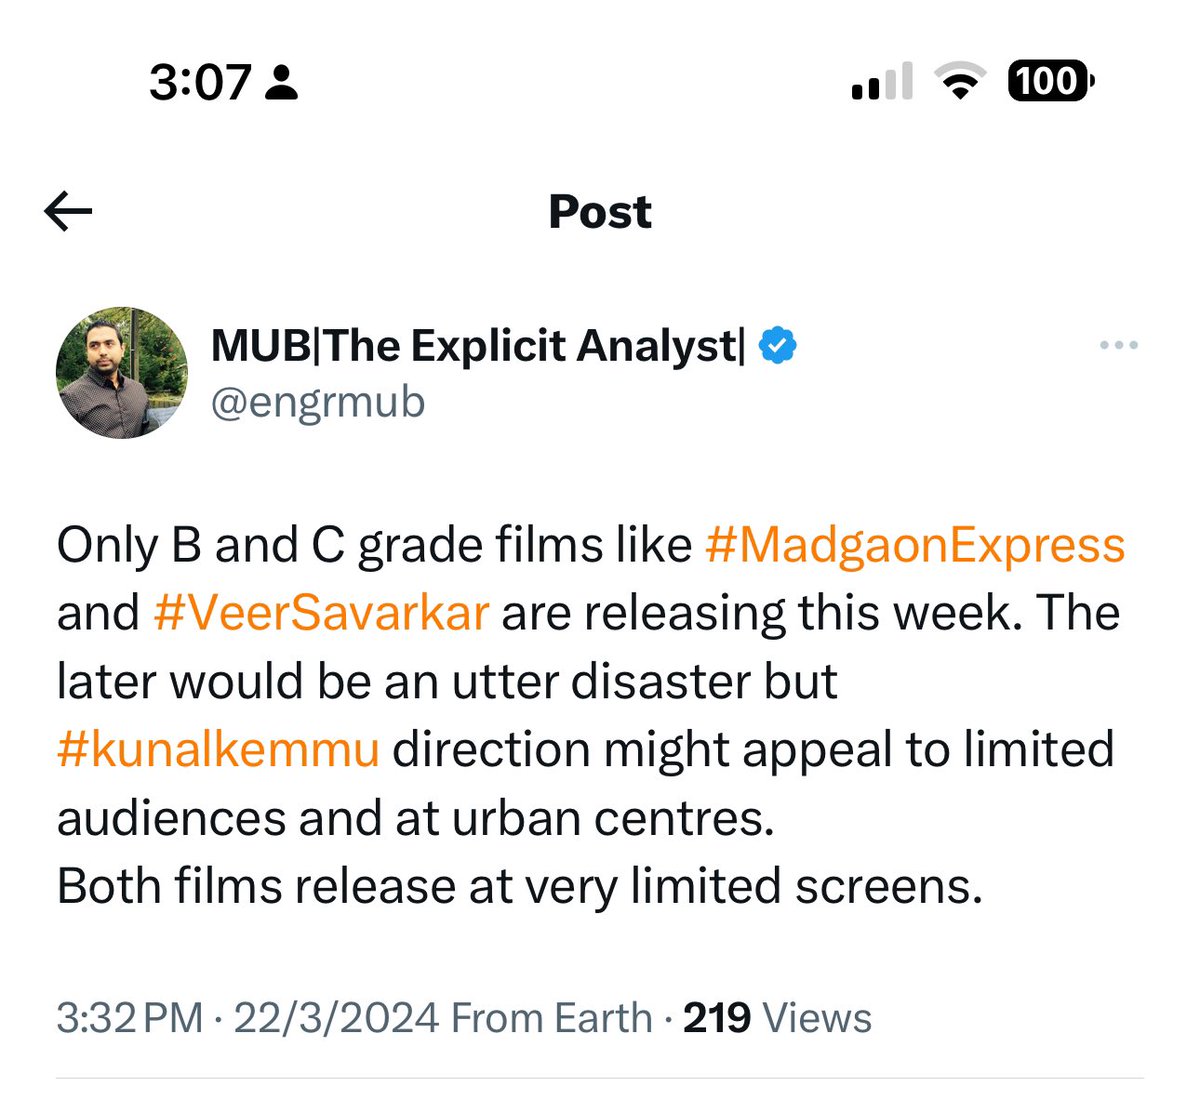 Already predicted that #MadgaonExpress will perform better than #VeerSavarkarInCinemasNow .
See below prediction and their first day business.